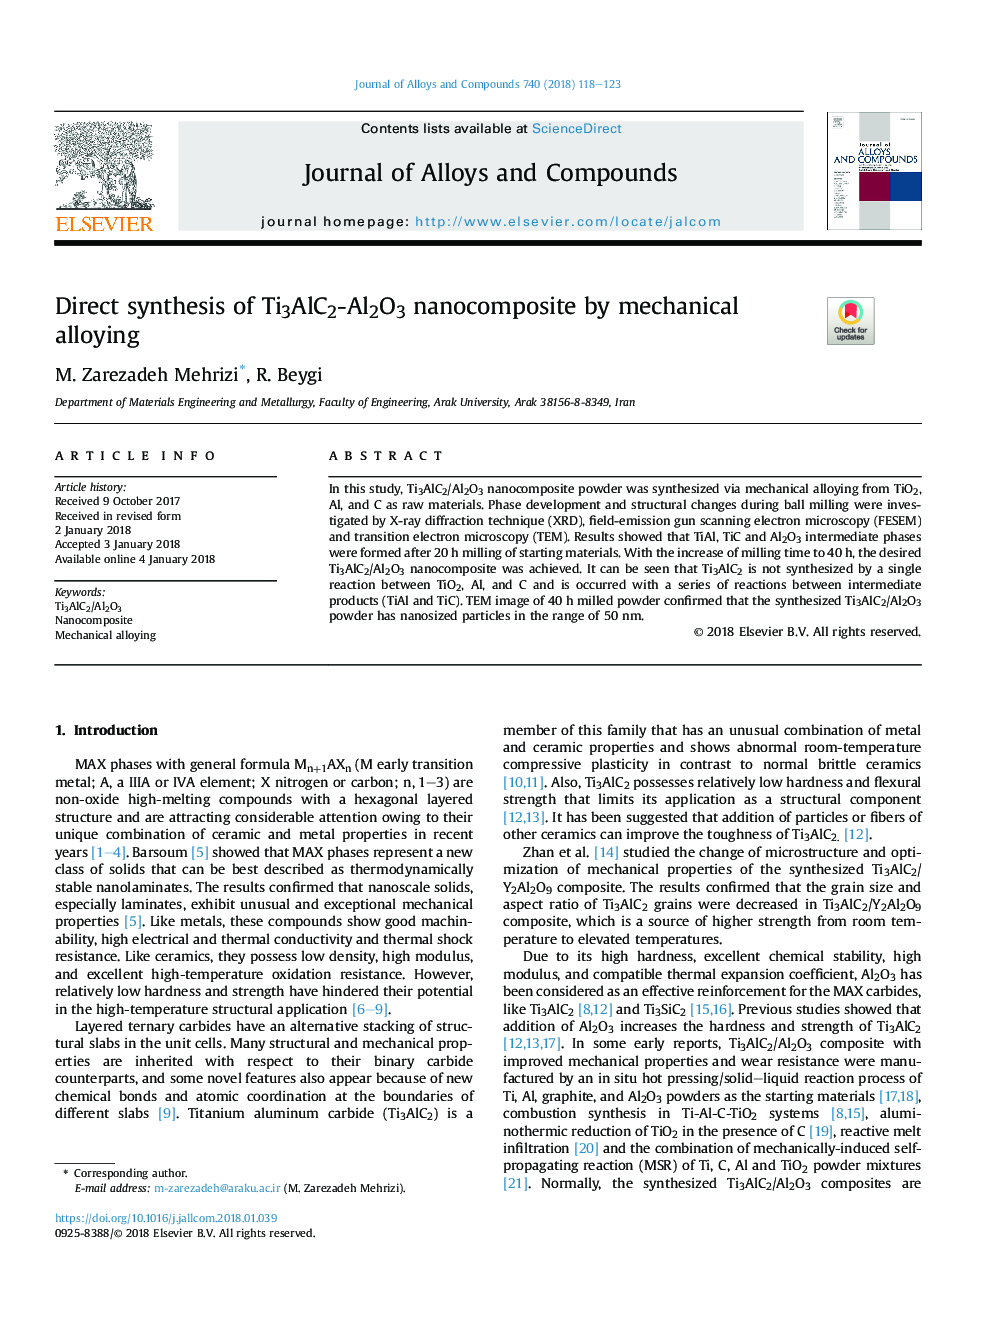 Direct synthesis of Ti3AlC2-Al2O3 nanocomposite by mechanical alloying